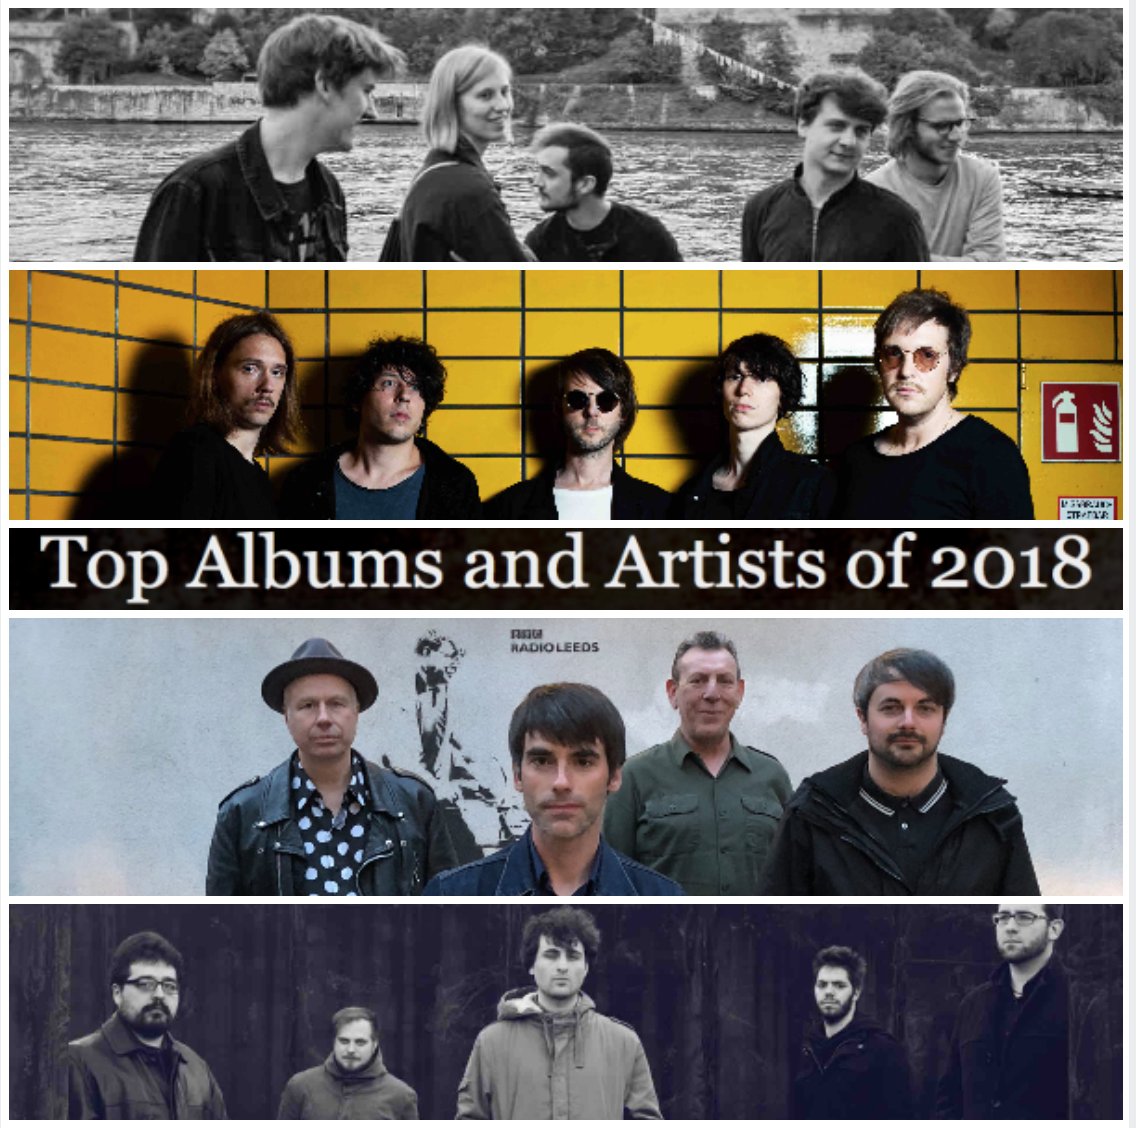 Numerous artists from our roster rank in 2018's top albums by Electric Glare @DJMacWoodyRadio. Congrats to Beauty In Chaos @MichaelCiravolo @HOLYGRAM_band @WhisperingSons (via @CleopatraRecord) @Klammerband @JapanSuicideIT @PalmGhosts and @WeAreParasols ~ goo.gl/baCyvA